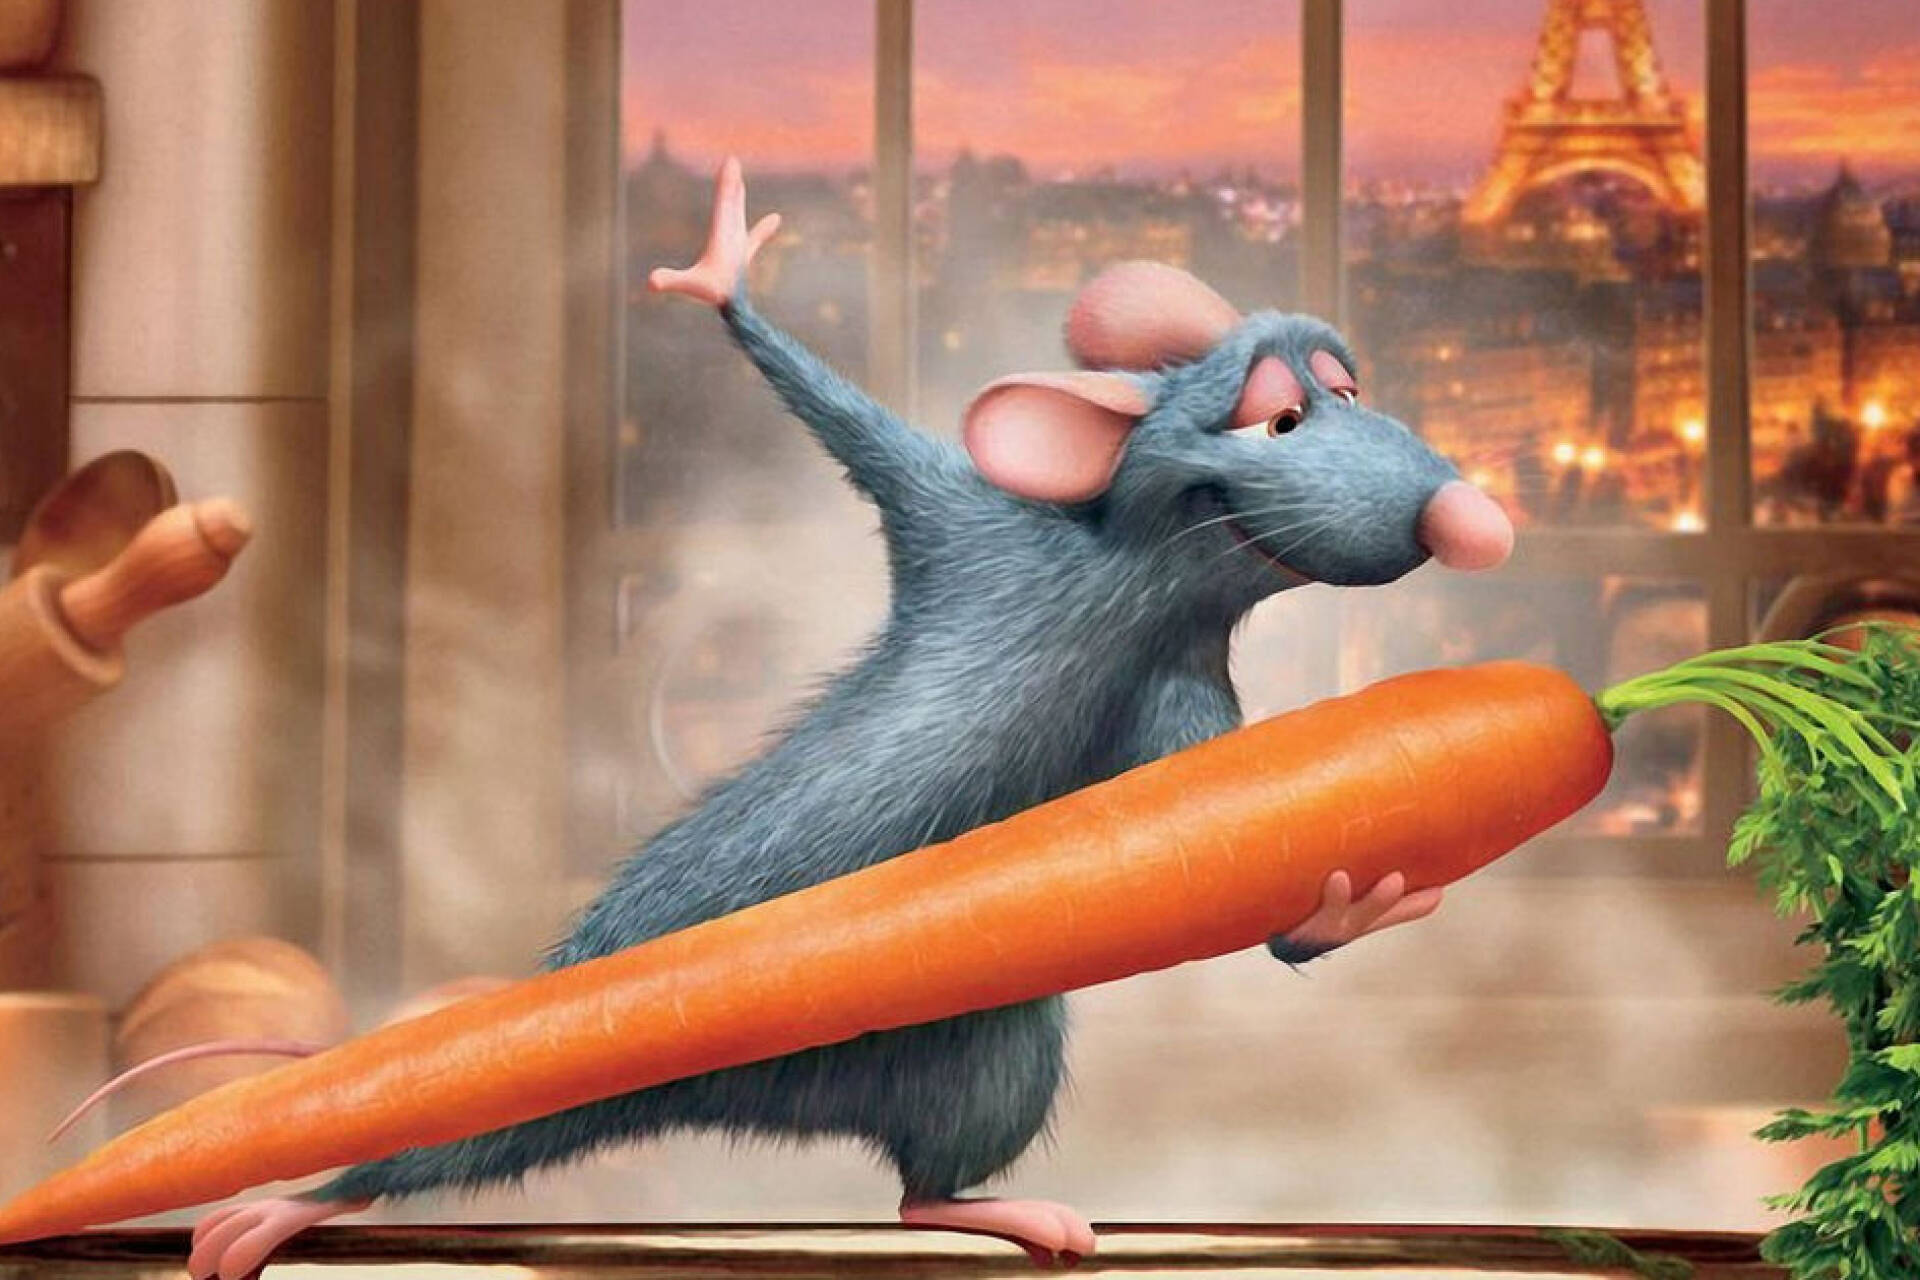 A still from the movie 'Ratatouille'